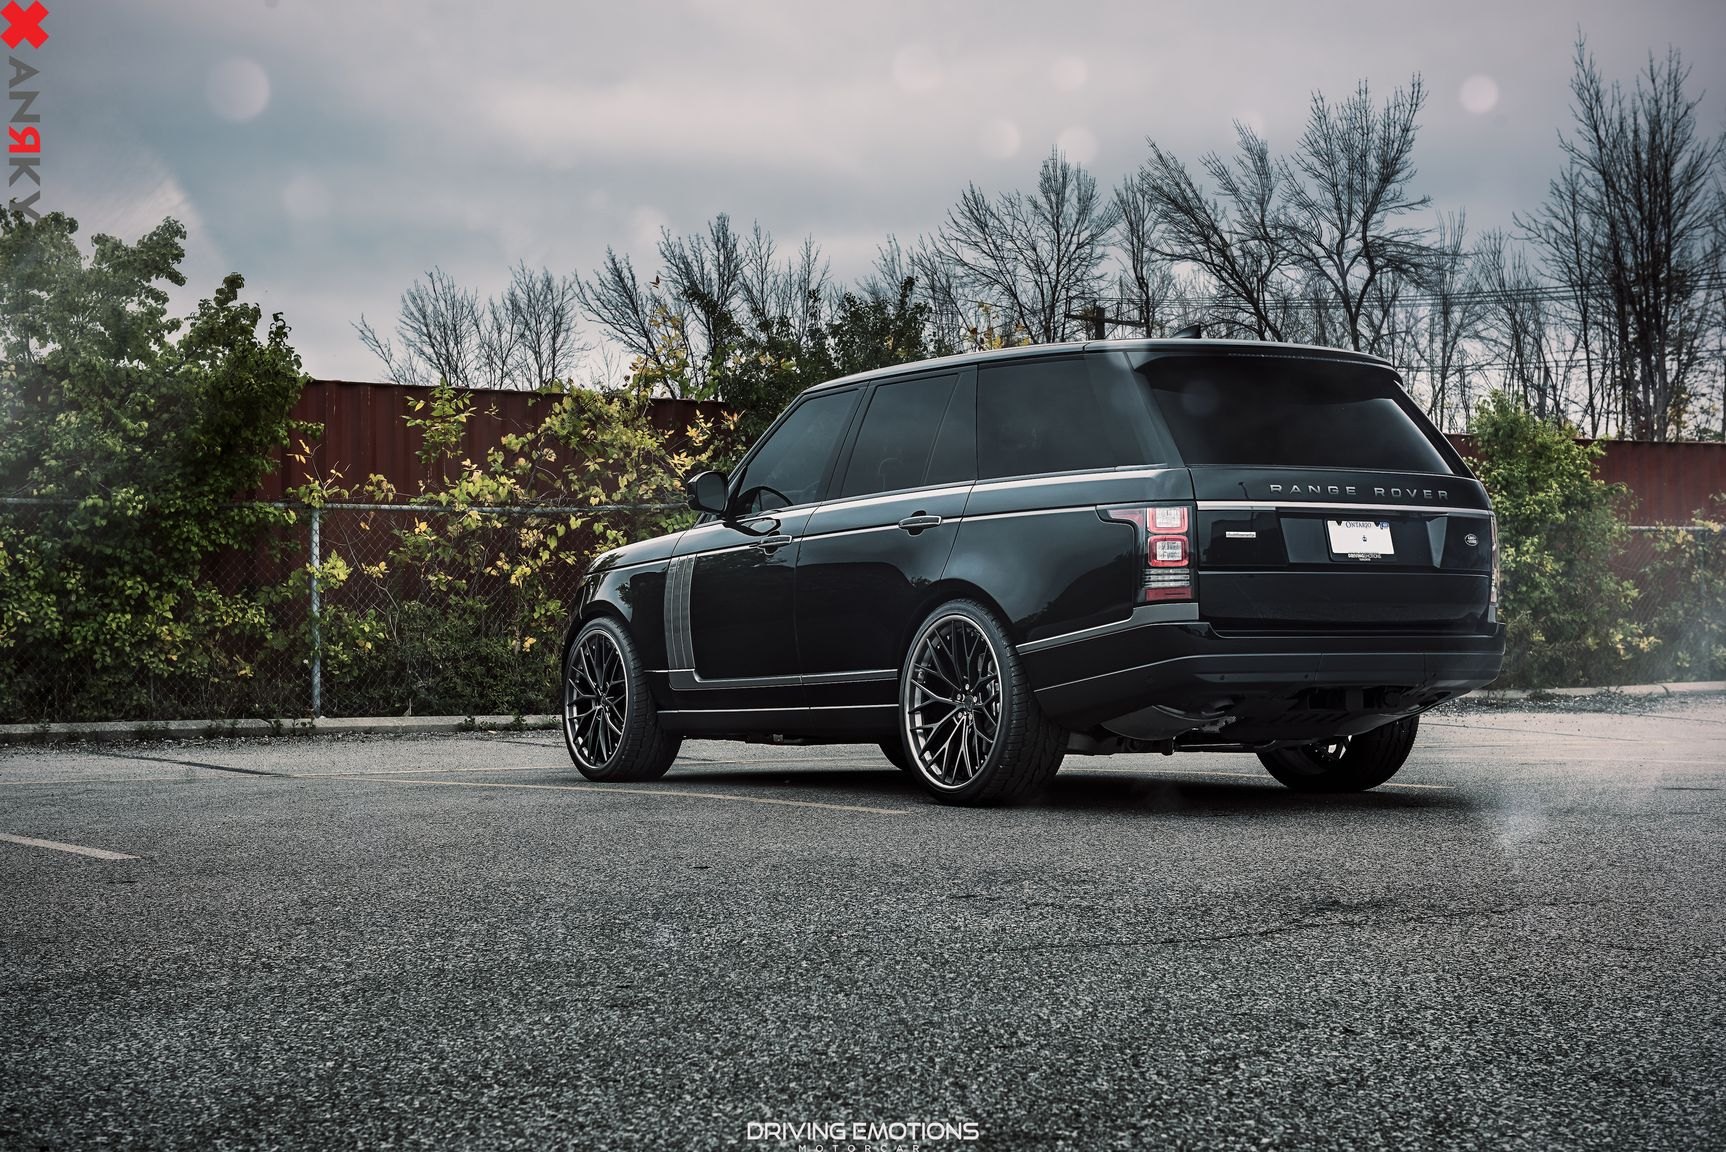 Black Range Rover with Roofline Spoiler - Photo by Anrky Wheels